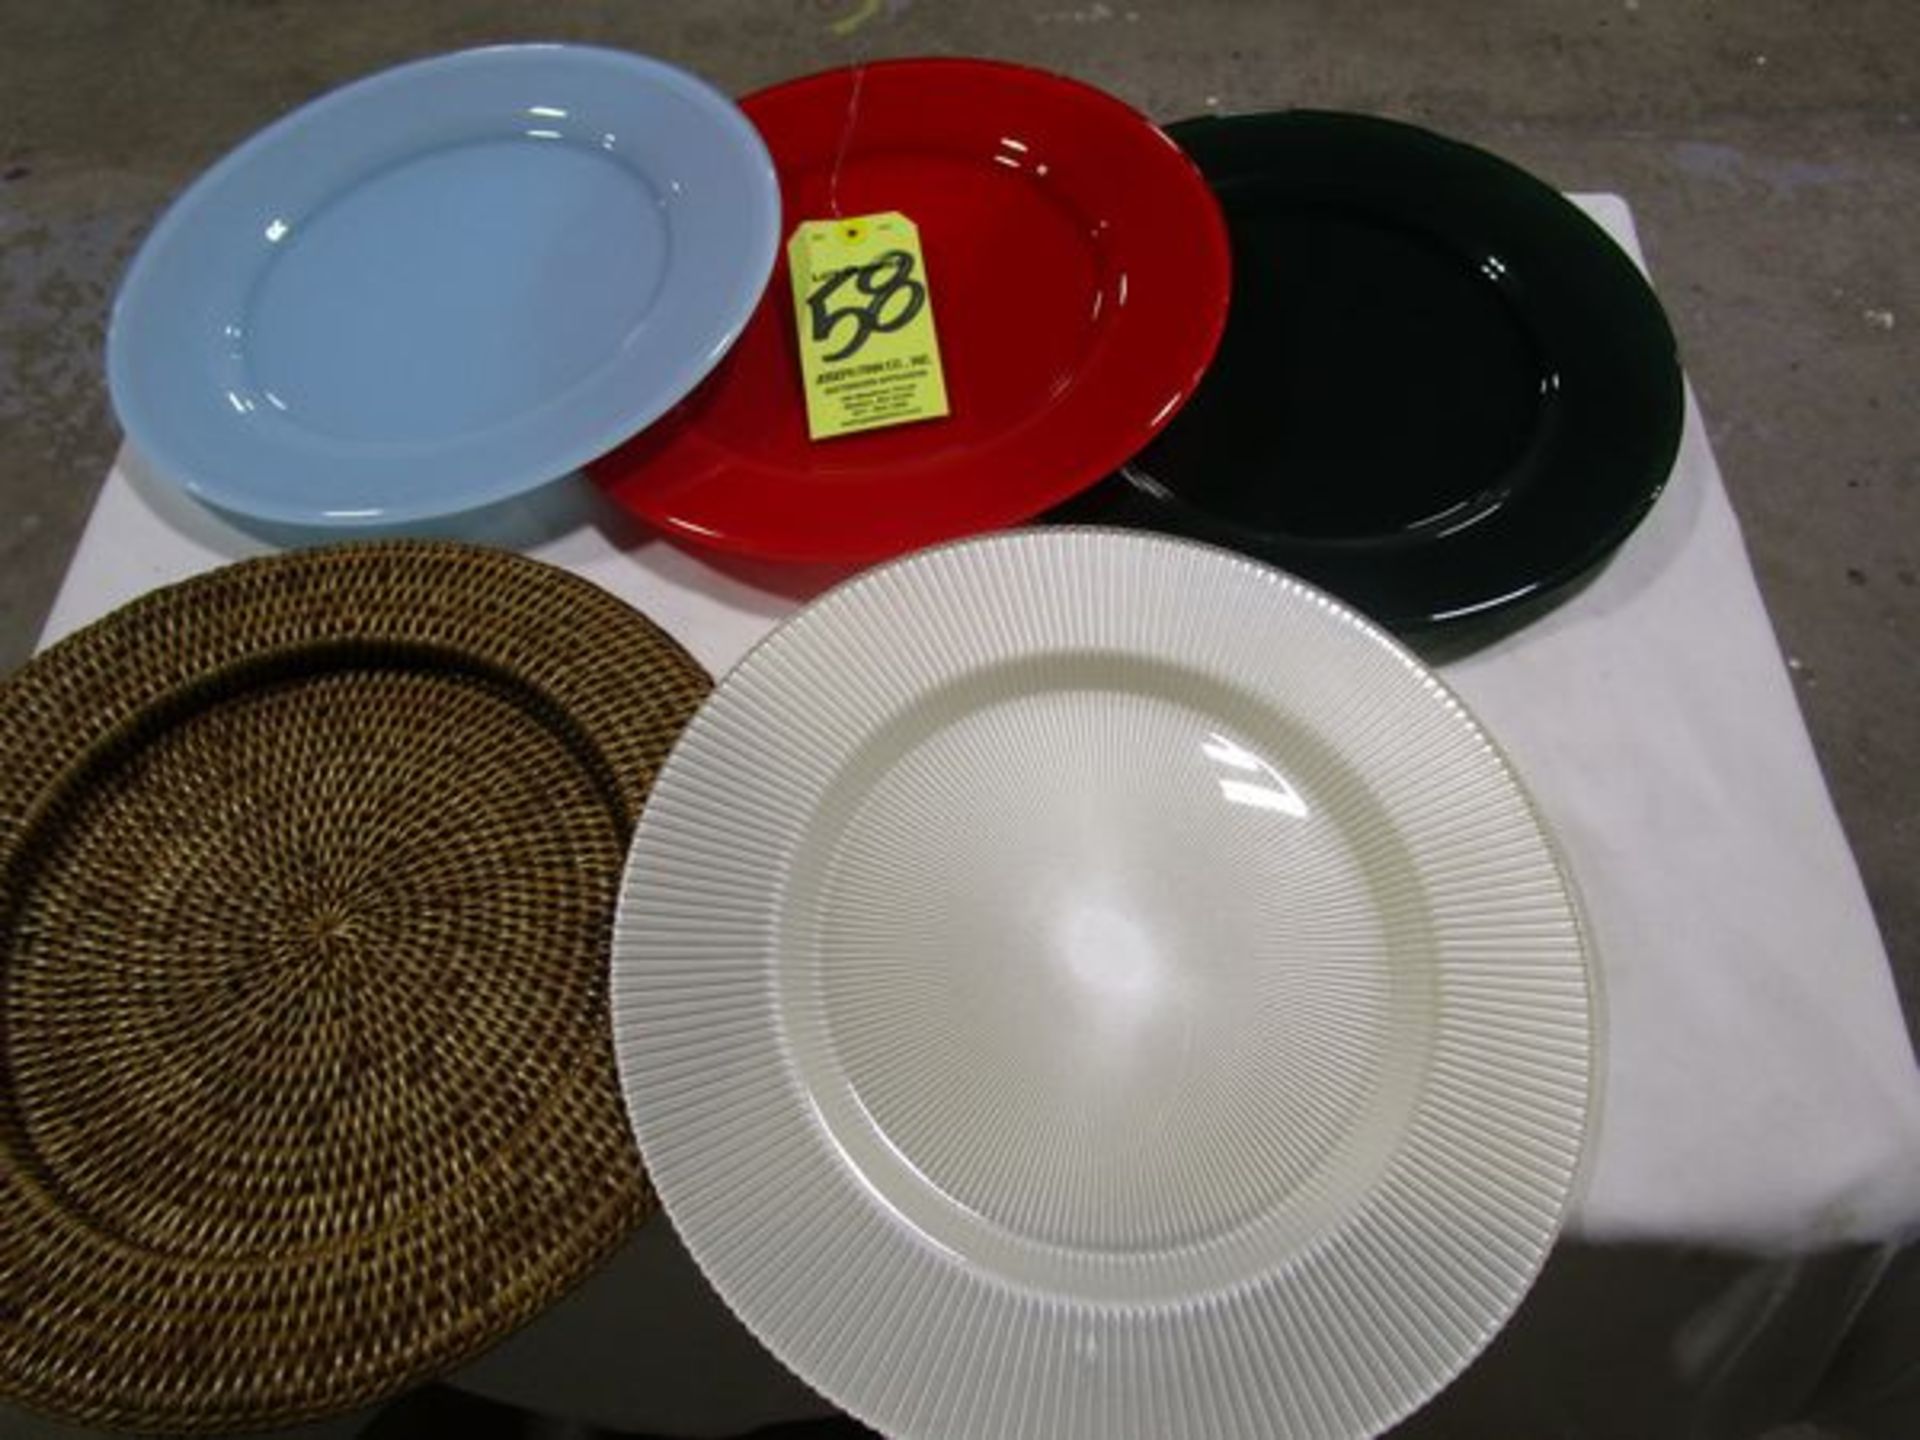 LOT (67) 12" Red Charger Plates, (85) 12" Light Blue Charger Plates, (84) 12" Green Charger